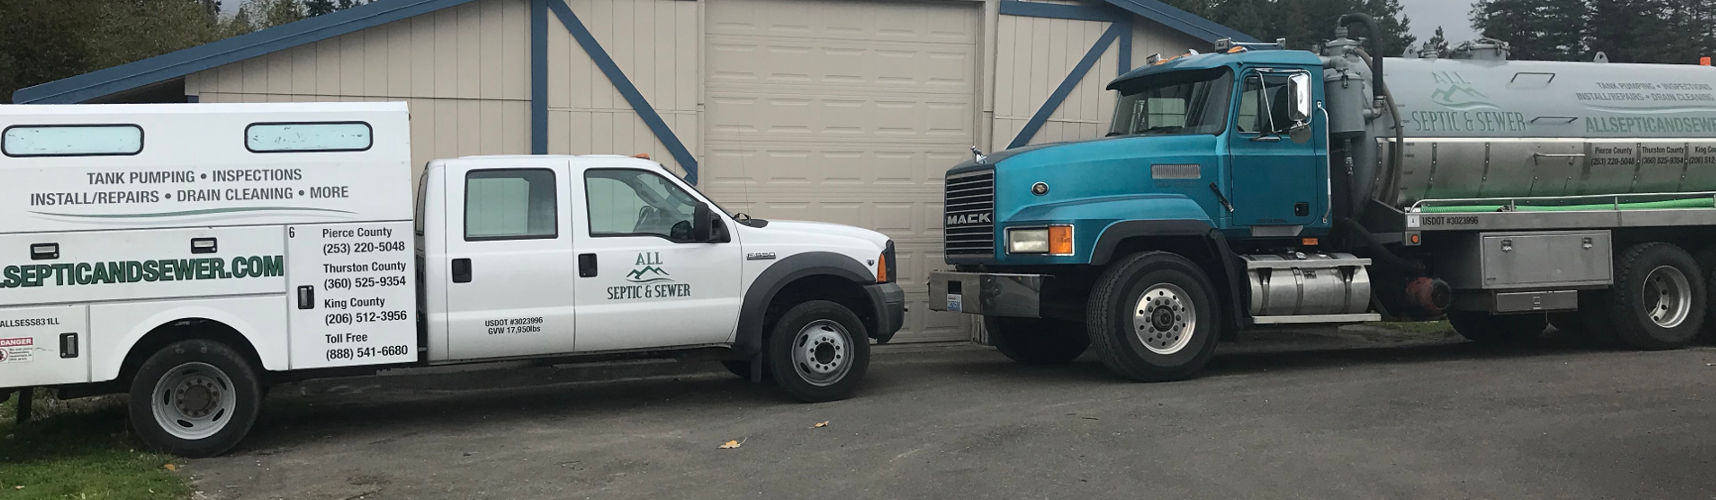 Puyallup, WA Septic & Sewer Specialists - All Septic & Sewer